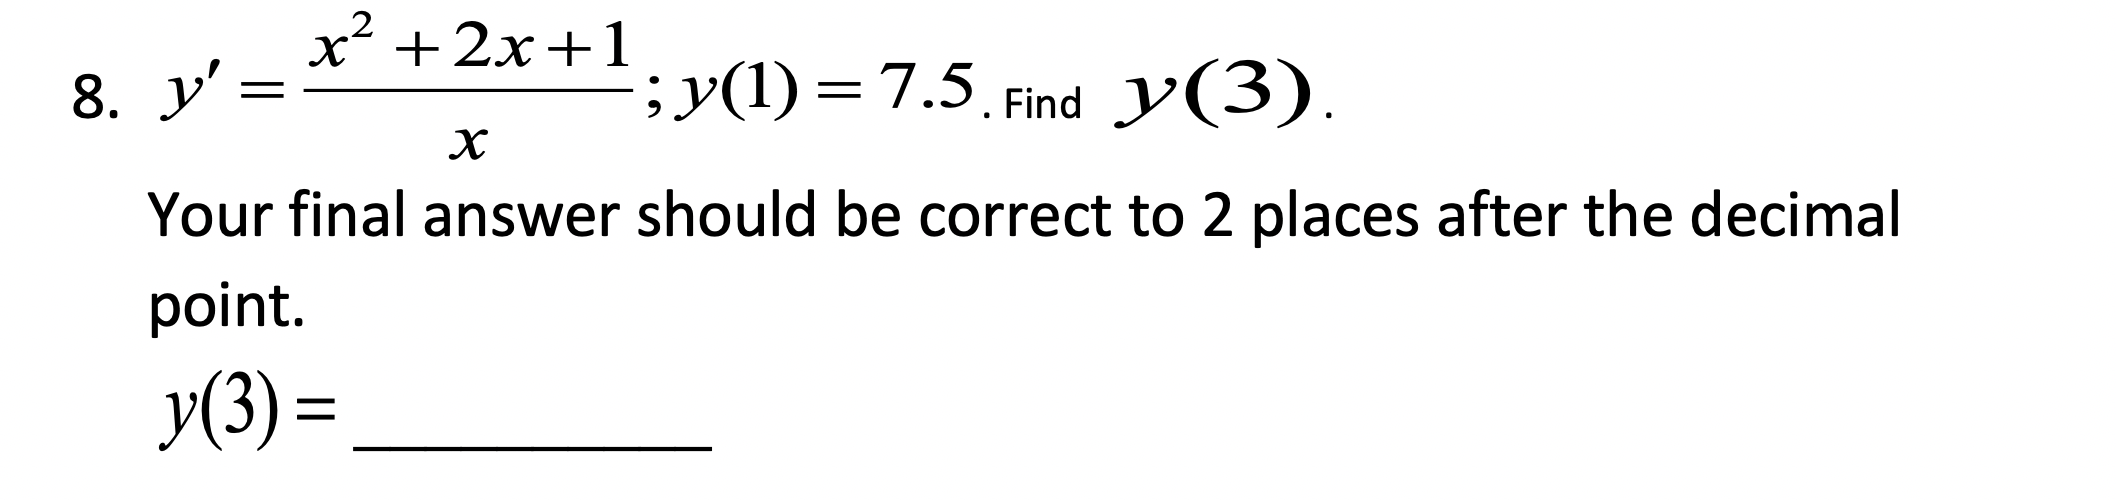 x´ +2x+1
8. y'
;y(1) = 7.5 Find y(3).
х
Your final answer should be correct to 2 places after the decimal
point.
У(3) -
